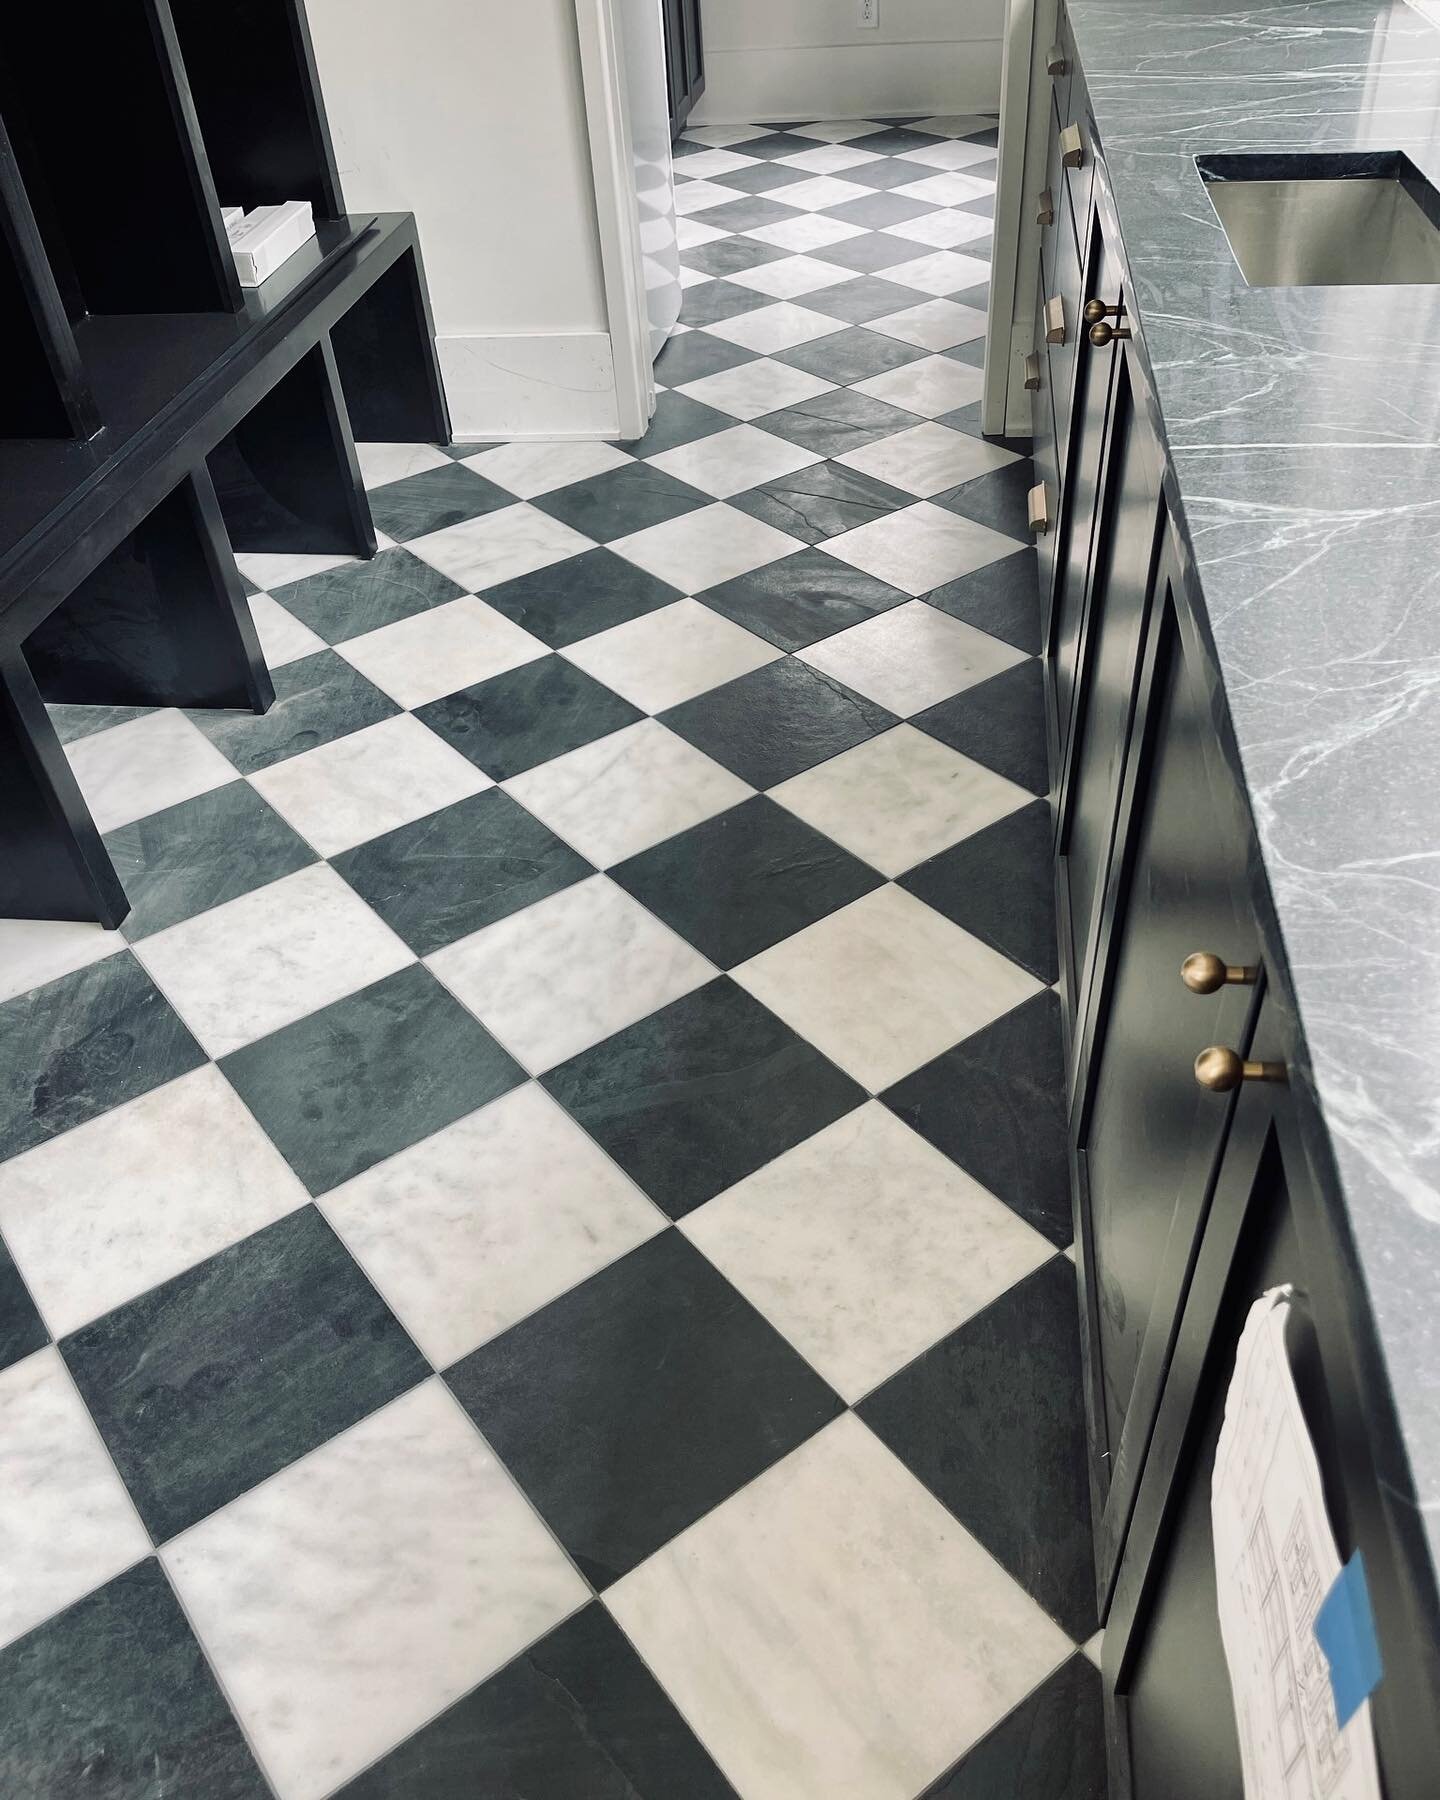 Getting creative with tile is a great way to add some color or a personal touch to any custom home. We love this checkerboard pattern at The Rose Ranch! ◾️◽️

#tiletuesday #charlestonhomes #chsbuilder #blackandwhitetiles #interiordesign #laundryroomi